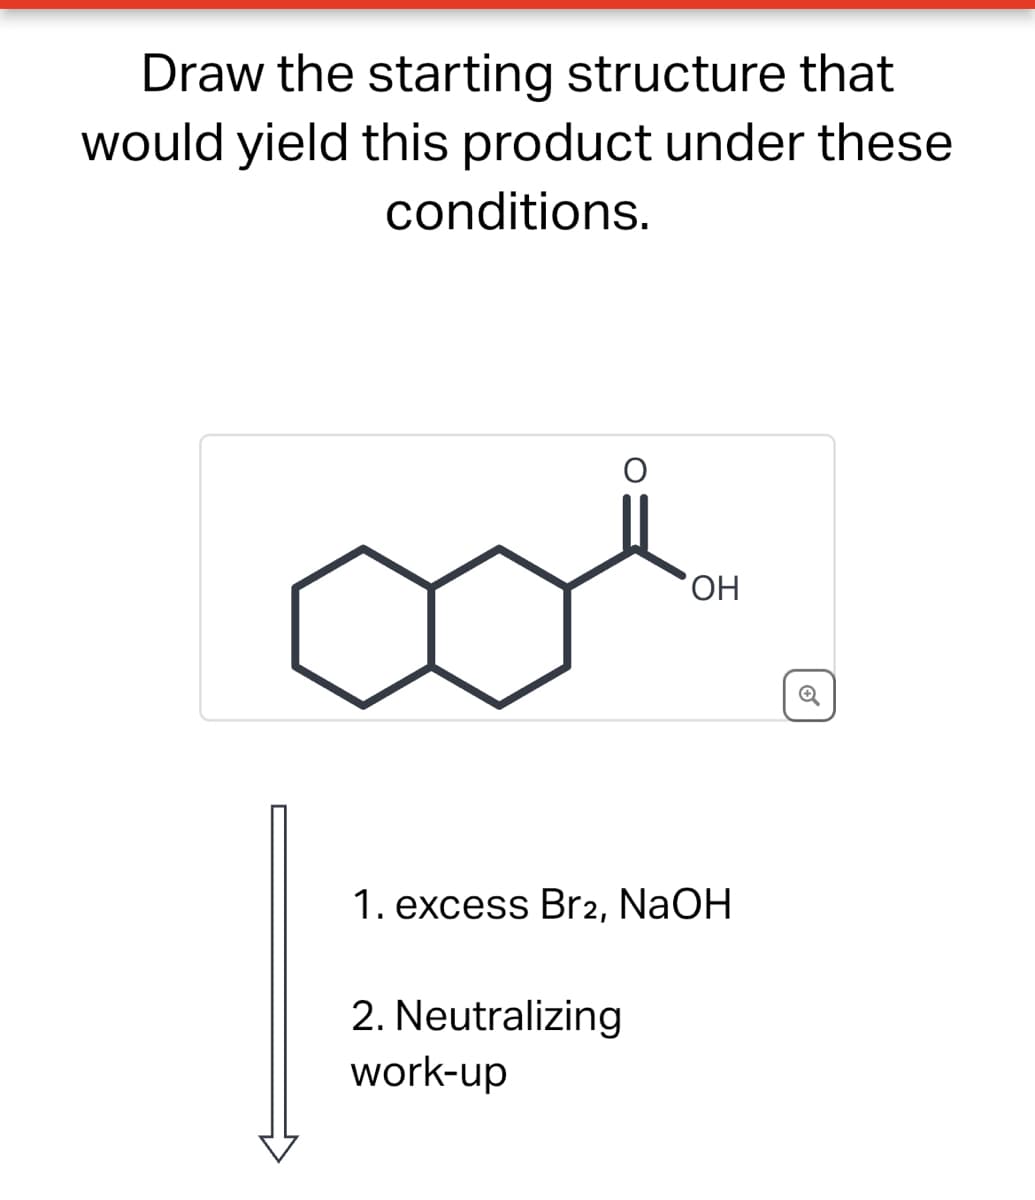 Draw the starting structure that
would yield this product under these
conditions.
OH
1. excess Br2, NaOH
2. Neutralizing
work-up